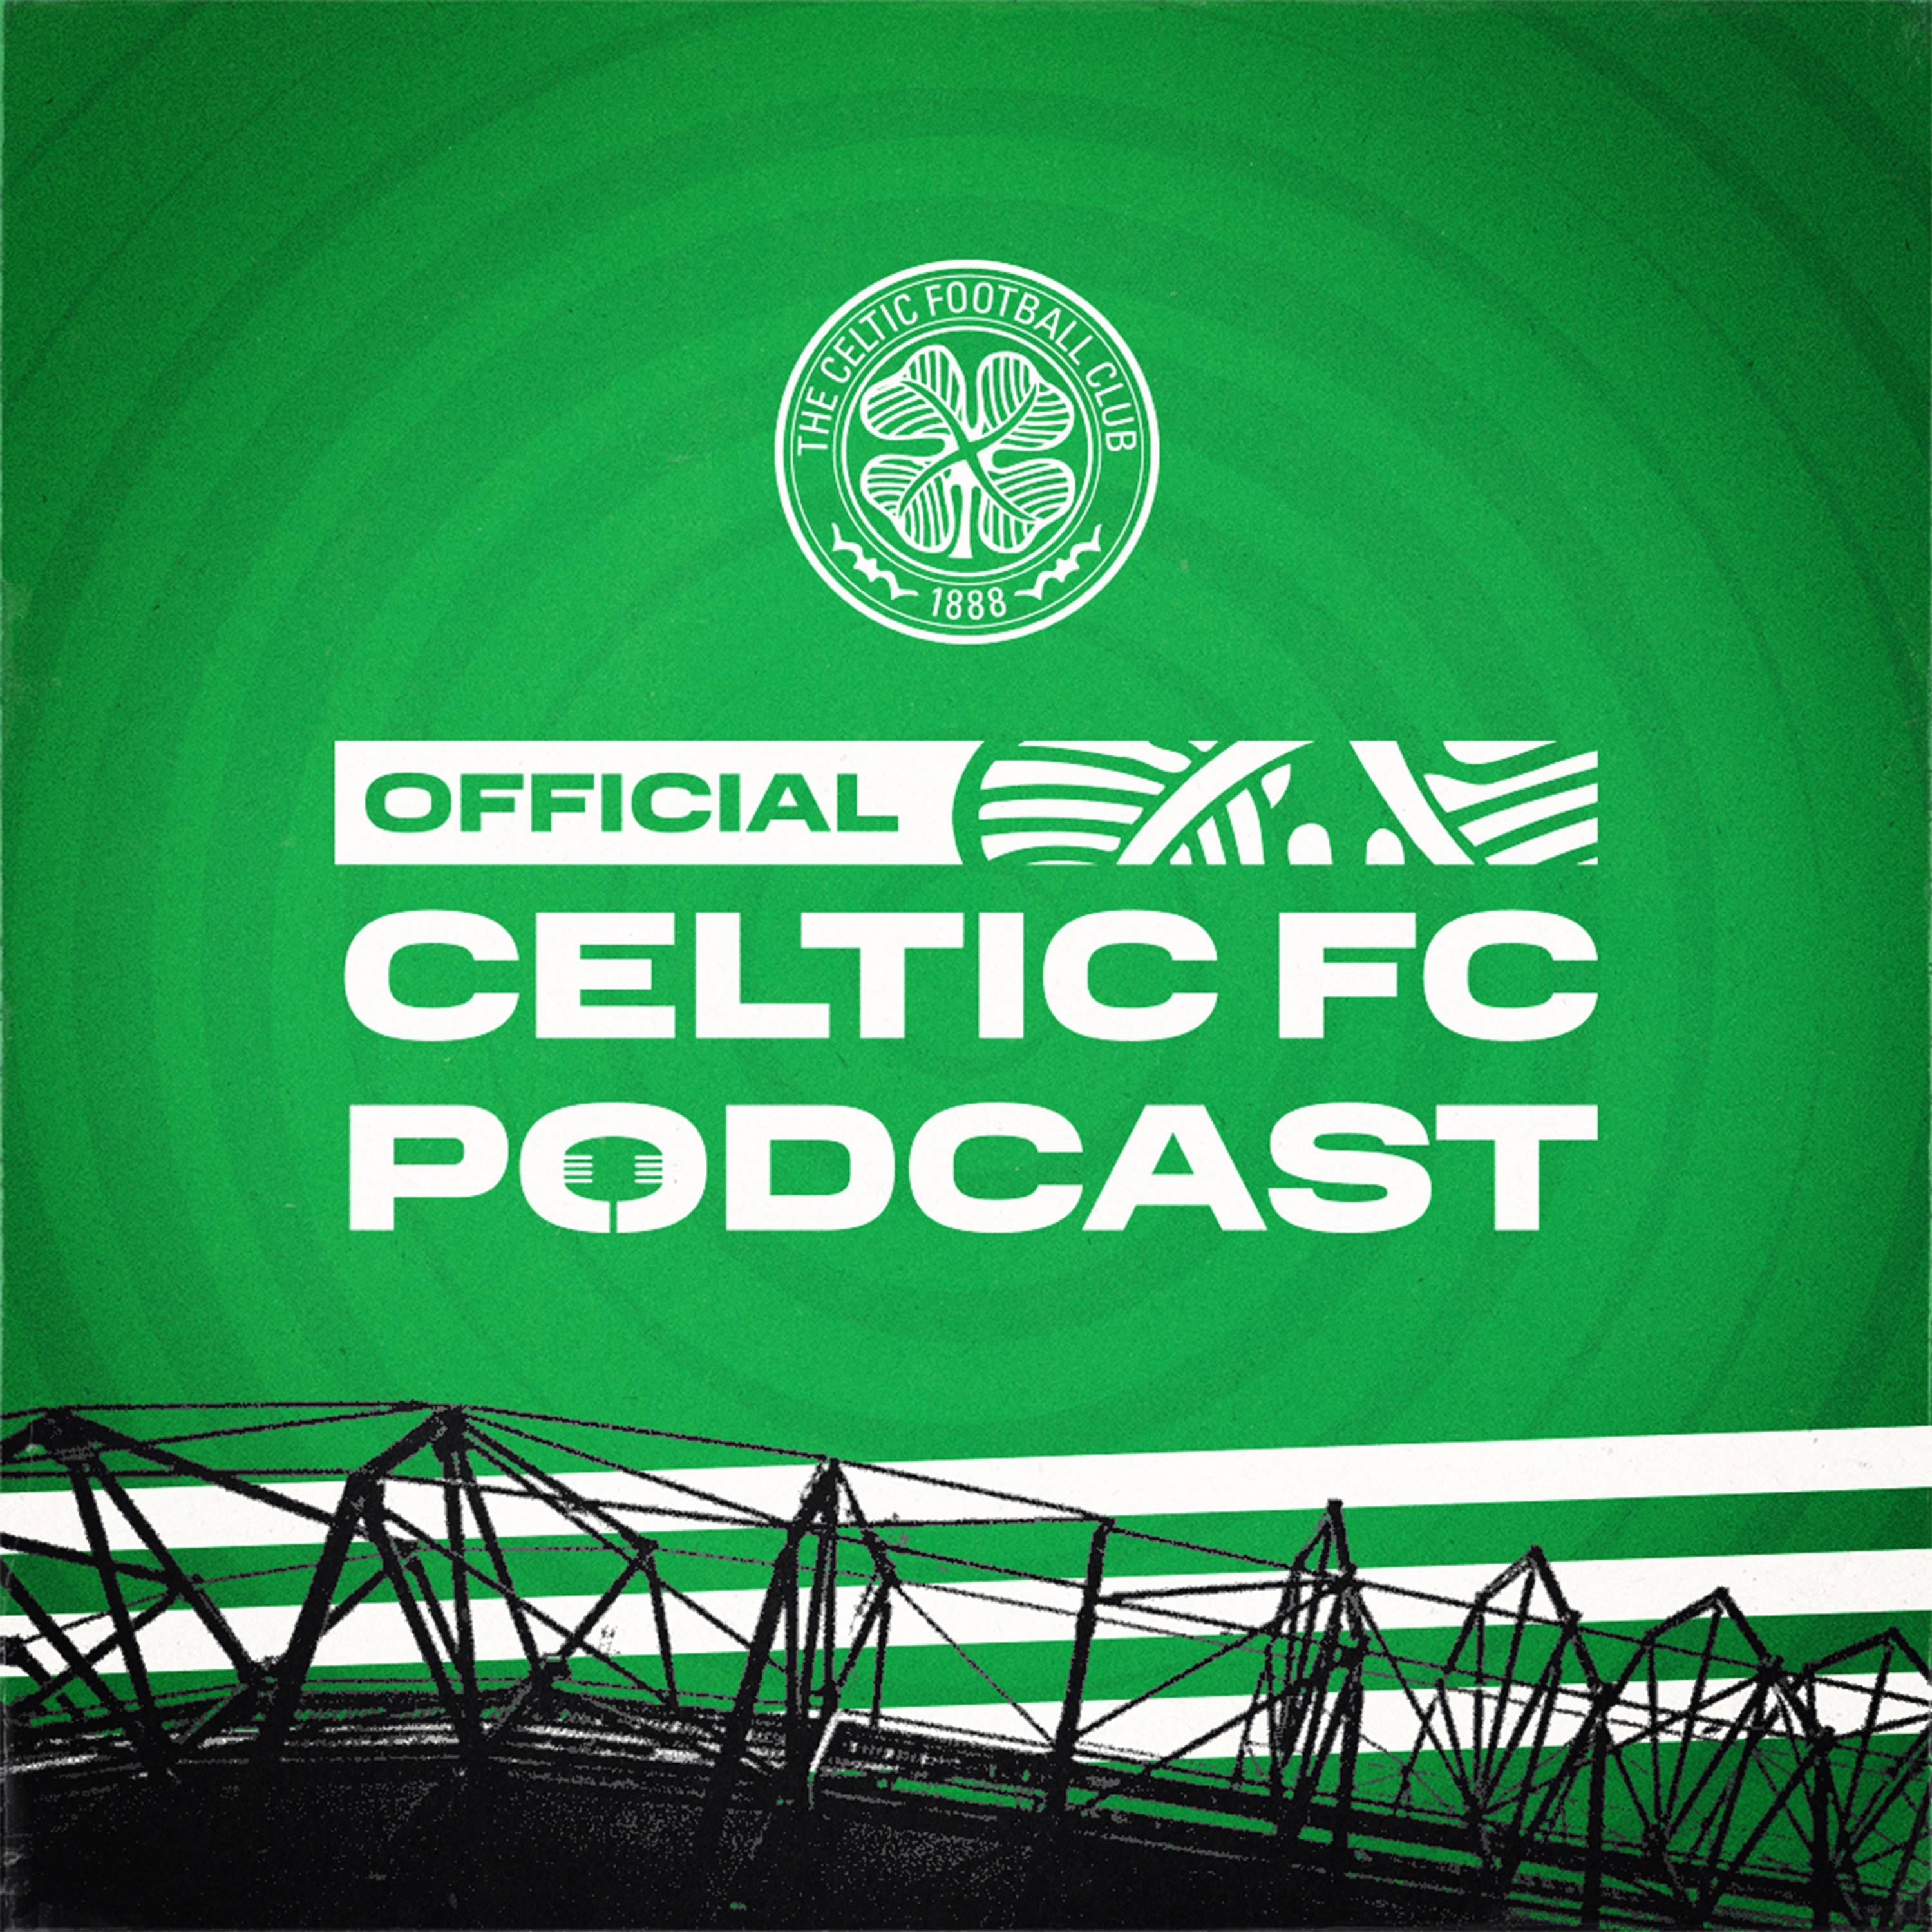 Former Celtic FC striker Simon Donnelly previews weekend’s action, reviews Champions League clash and shares brilliant stories about Tommy Burns and the 1998 league winning team